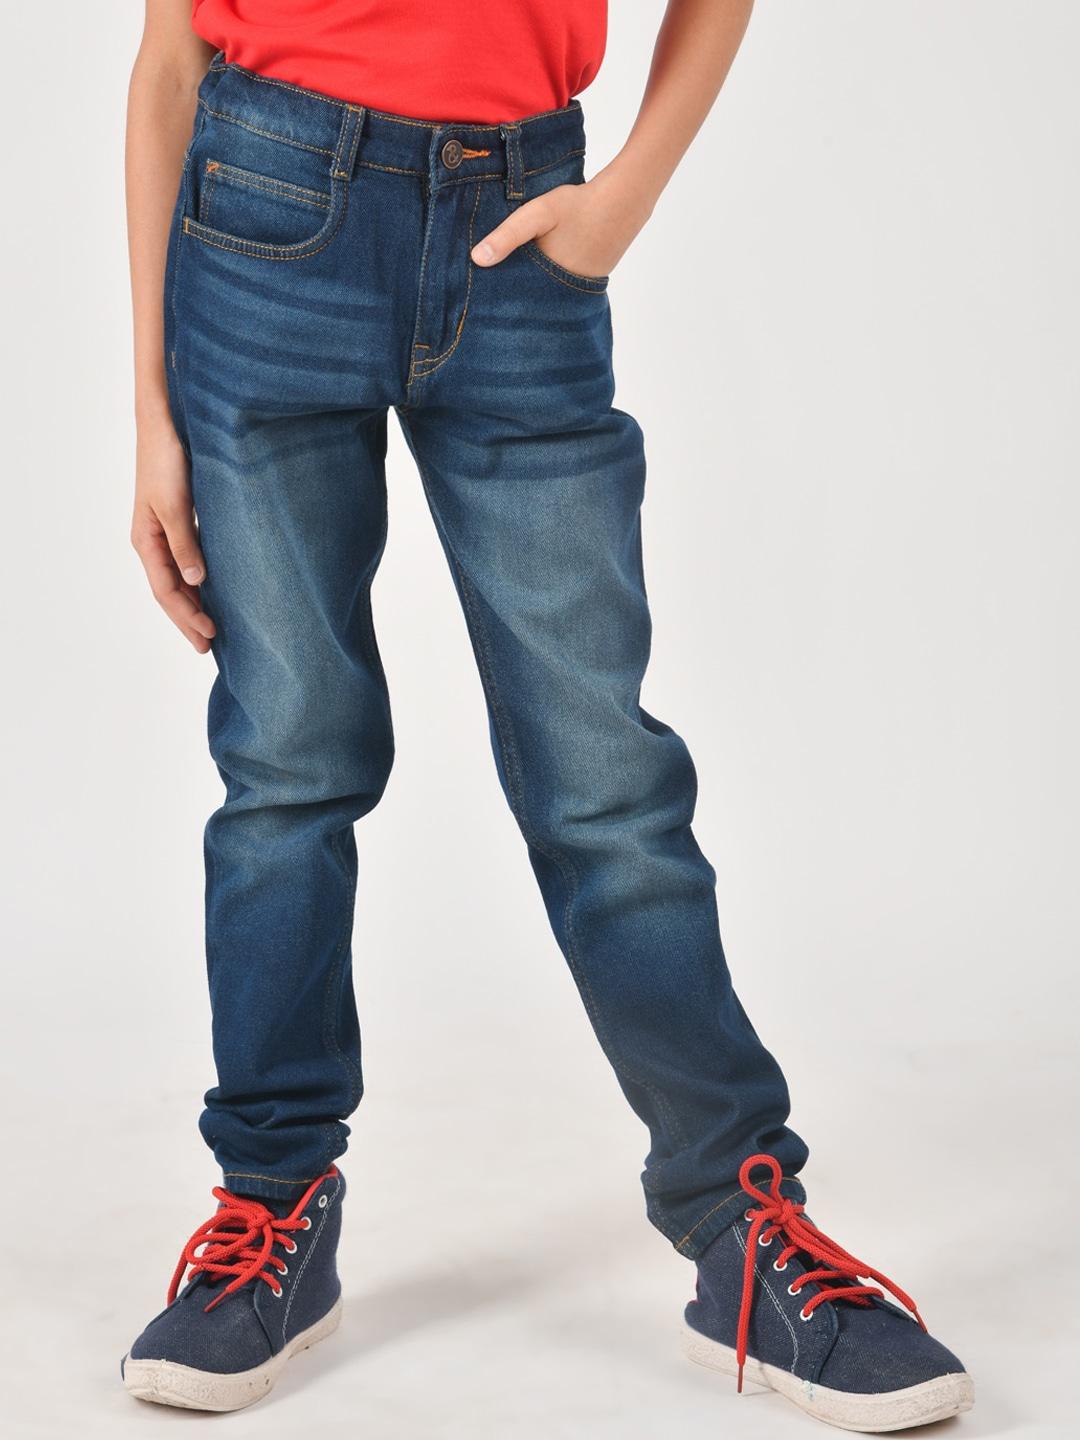 TALES & STORIES Boys Slim Fit Light Fade Stretchable Jeans